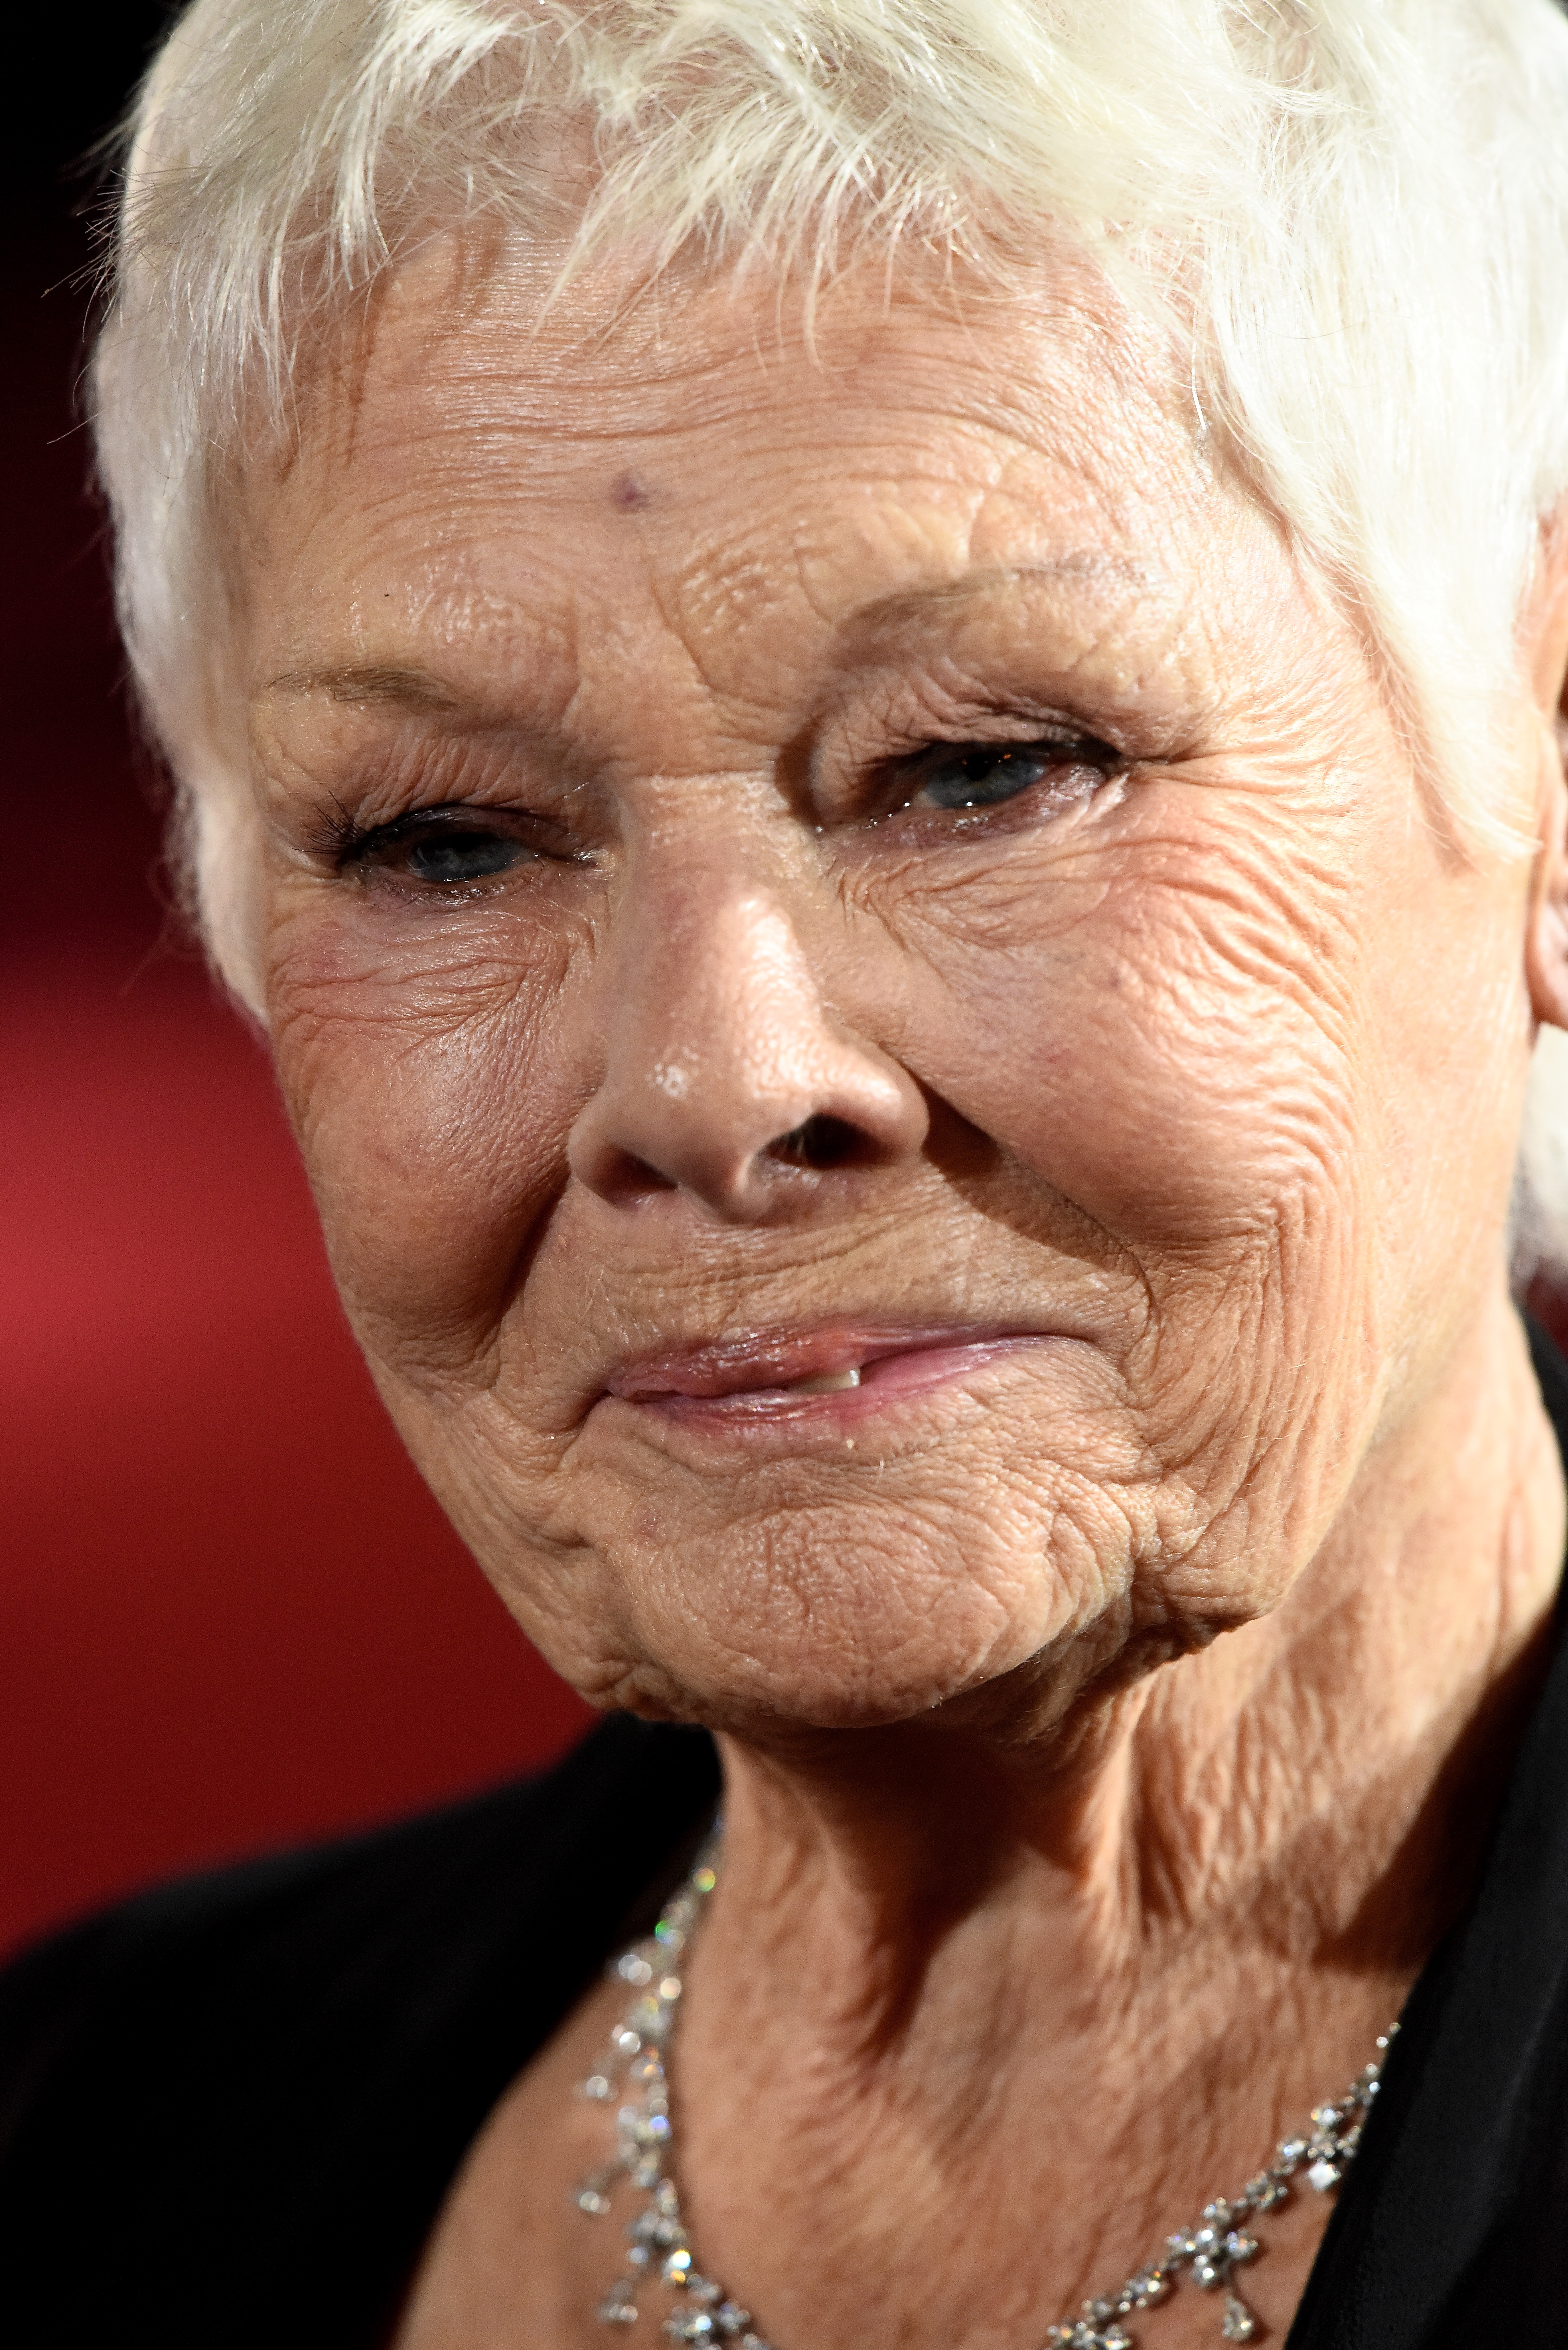 Dame Judi Dench attends the 'Murder On The Orient Express' World Premiere at Royal Albert Hall on November 2, 2017 in London, England. | Source: Getty Images